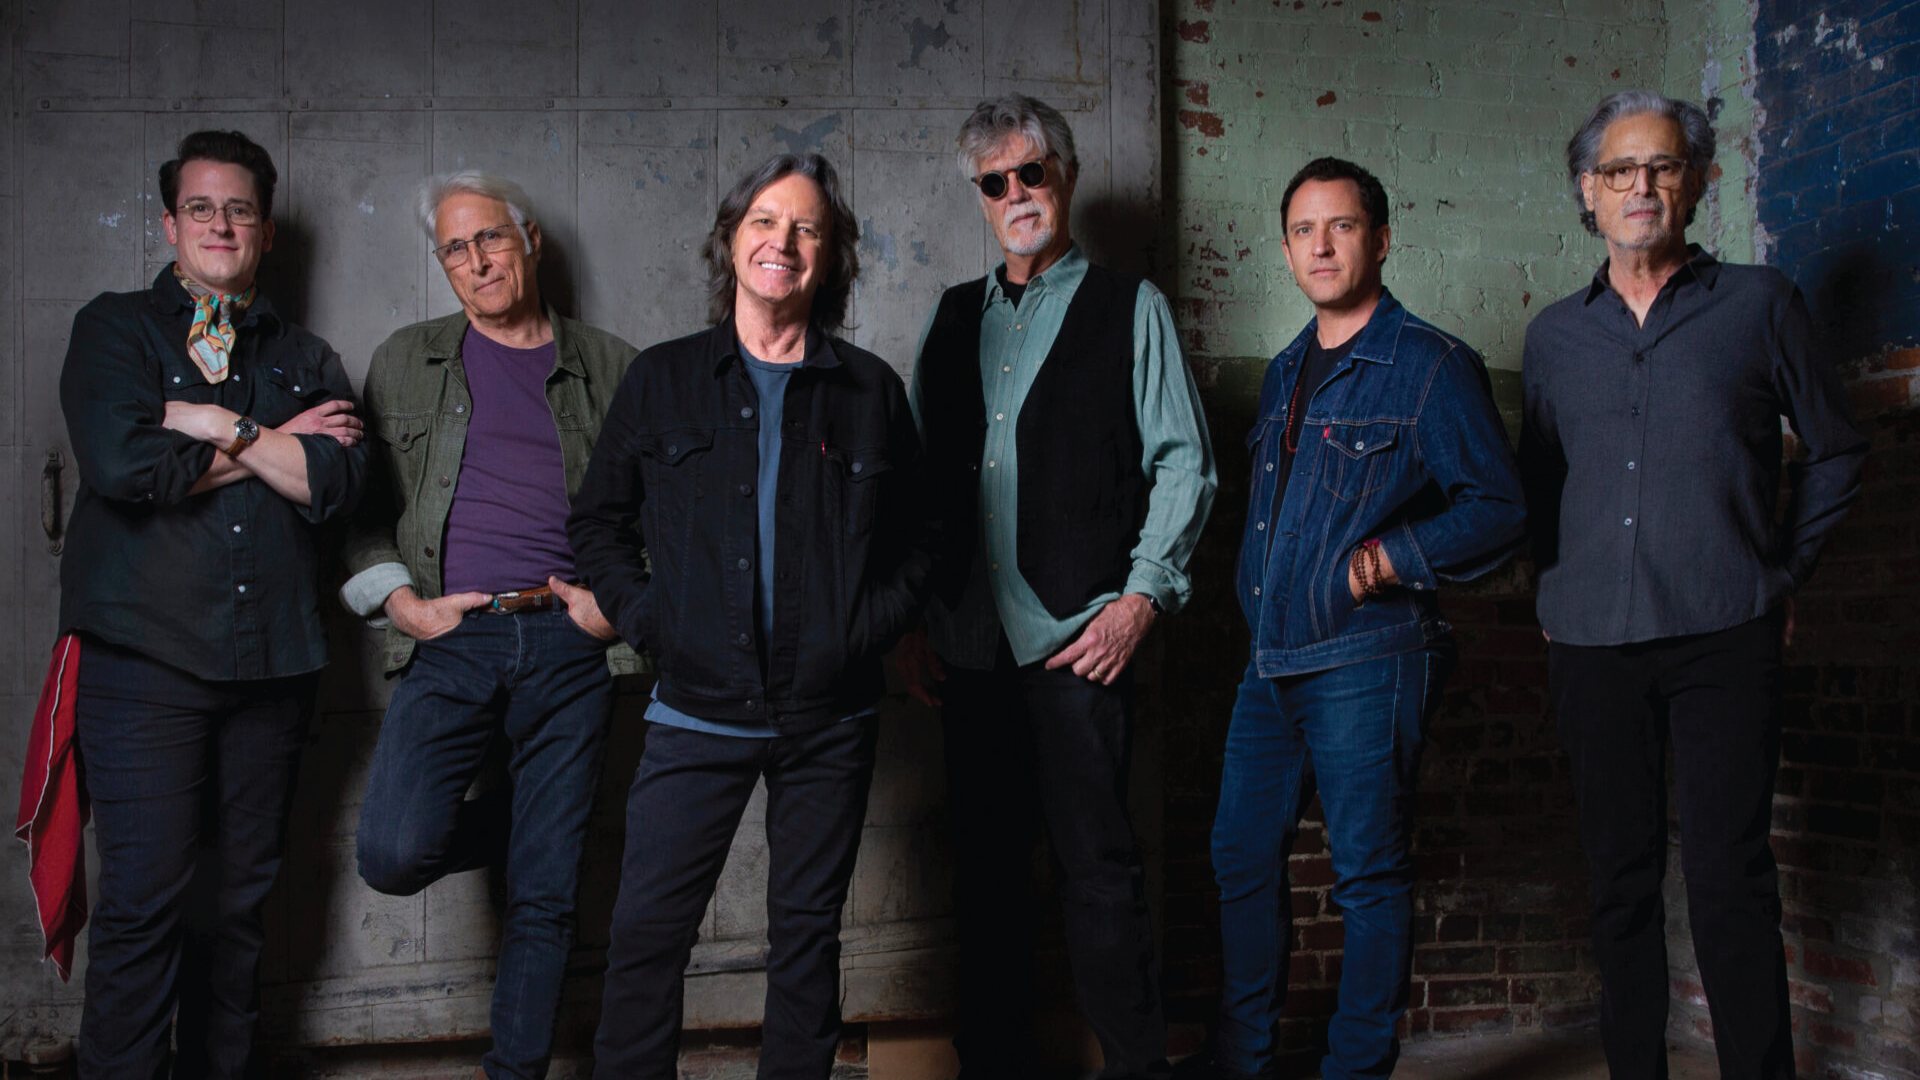 NITTY GRITTY DIRT BAND: The Hits, The History, and Dirt Does Dylan